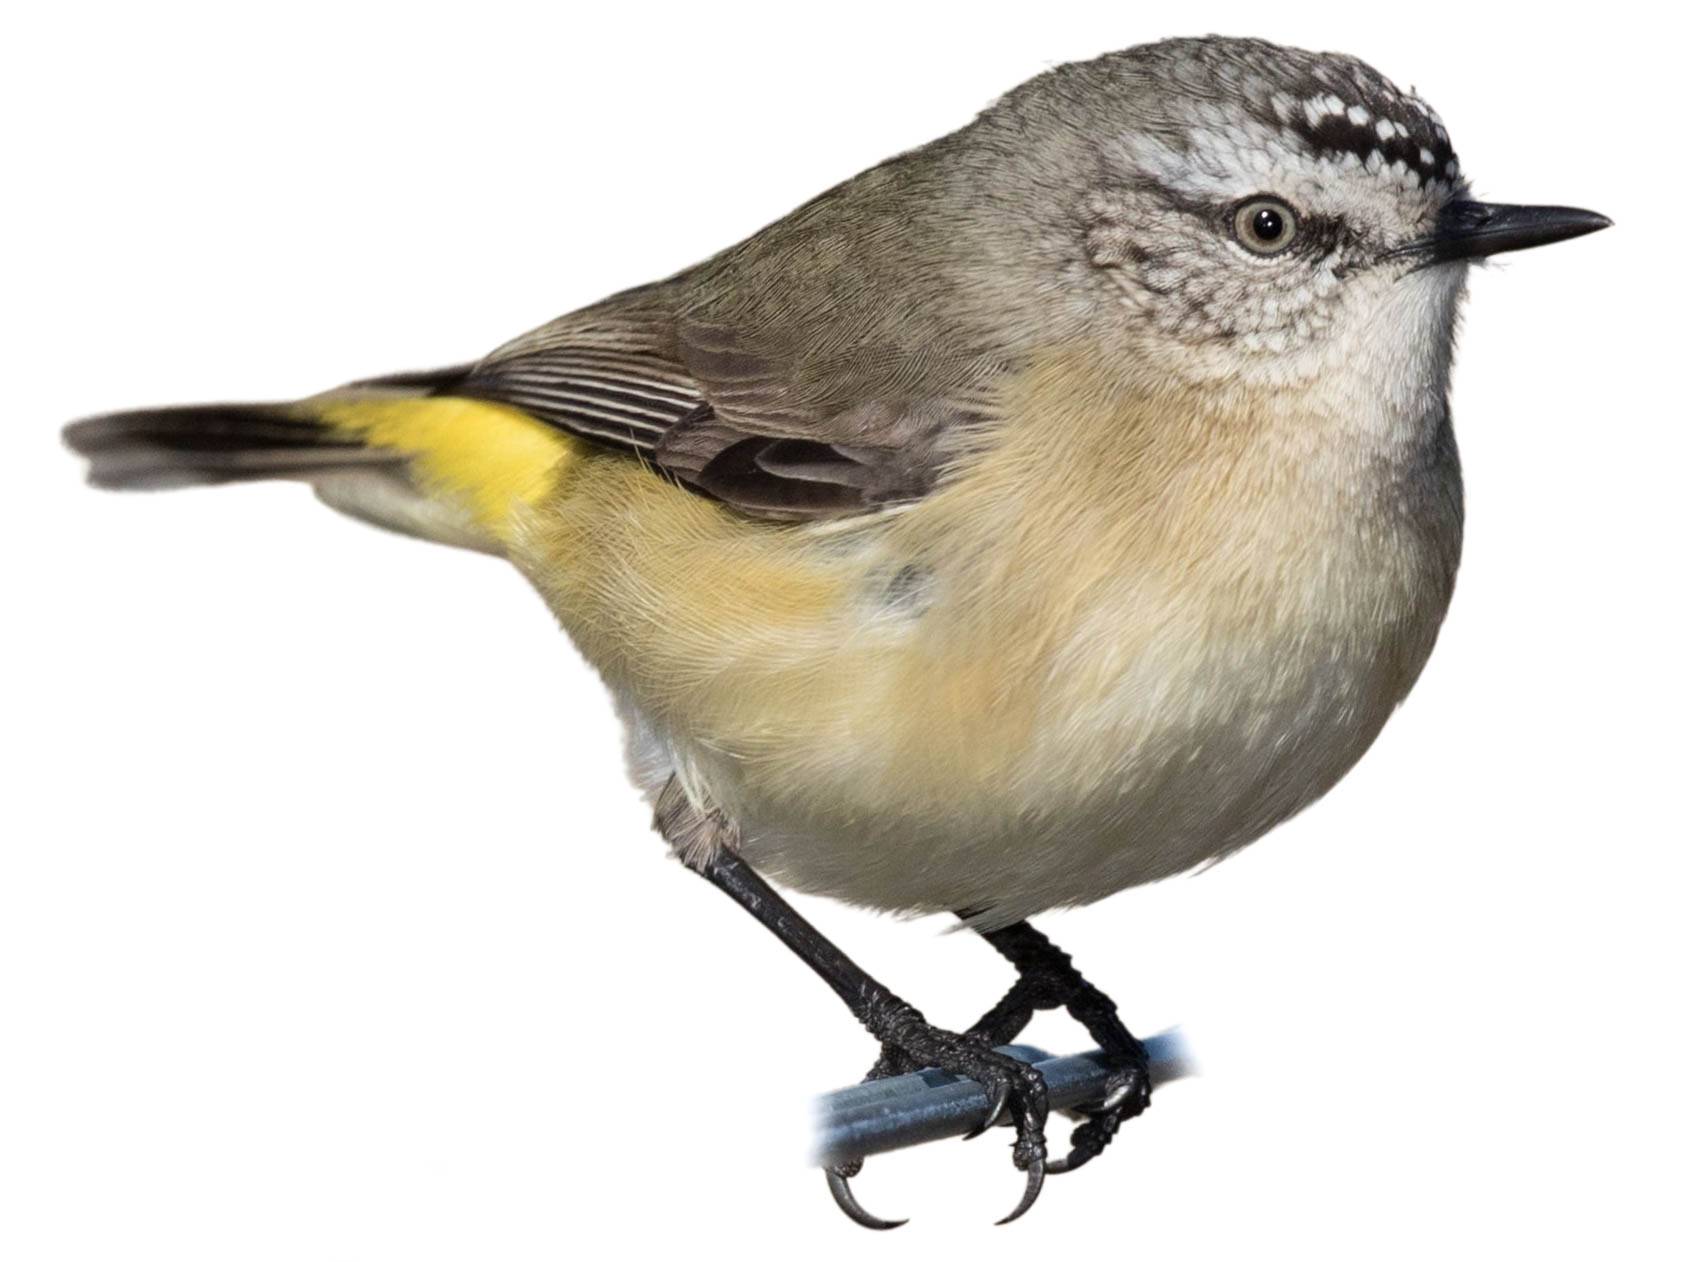 A photo of a Yellow-rumped Thornbill (Acanthiza chrysorrhoa)